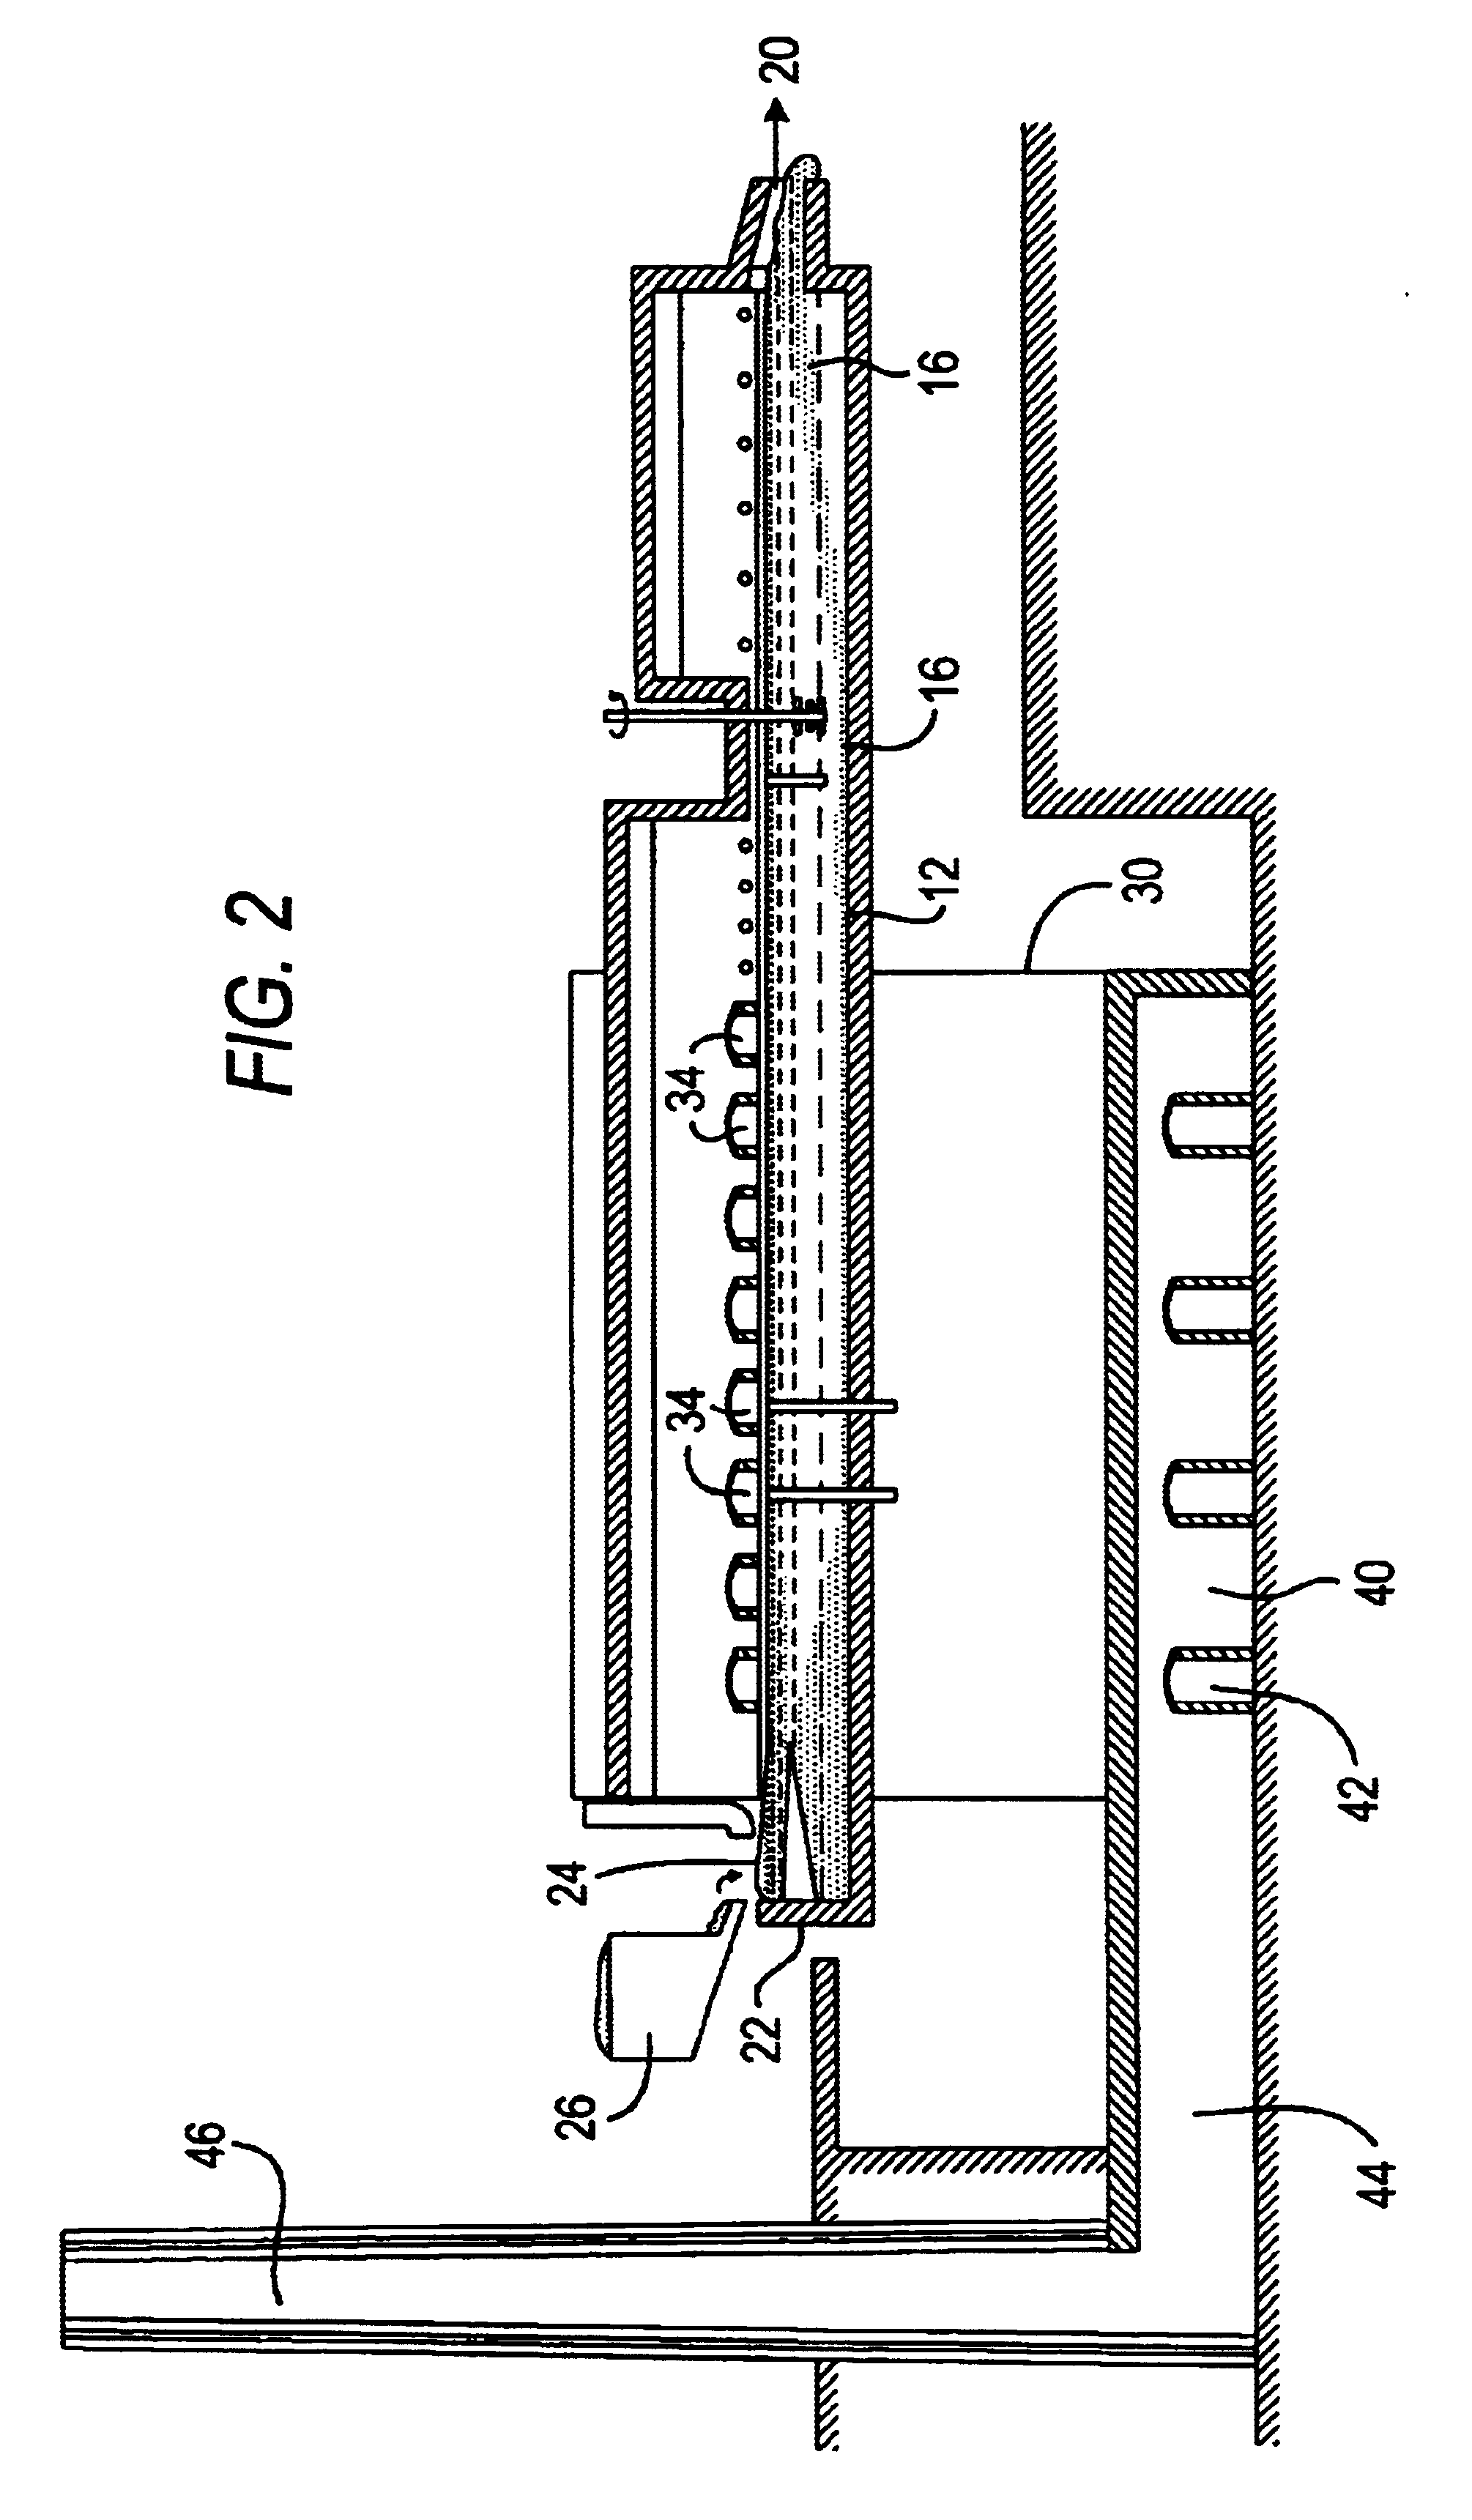 Control system for controlling the feeding and burning of a pulverized fuel in a glass melting furnace